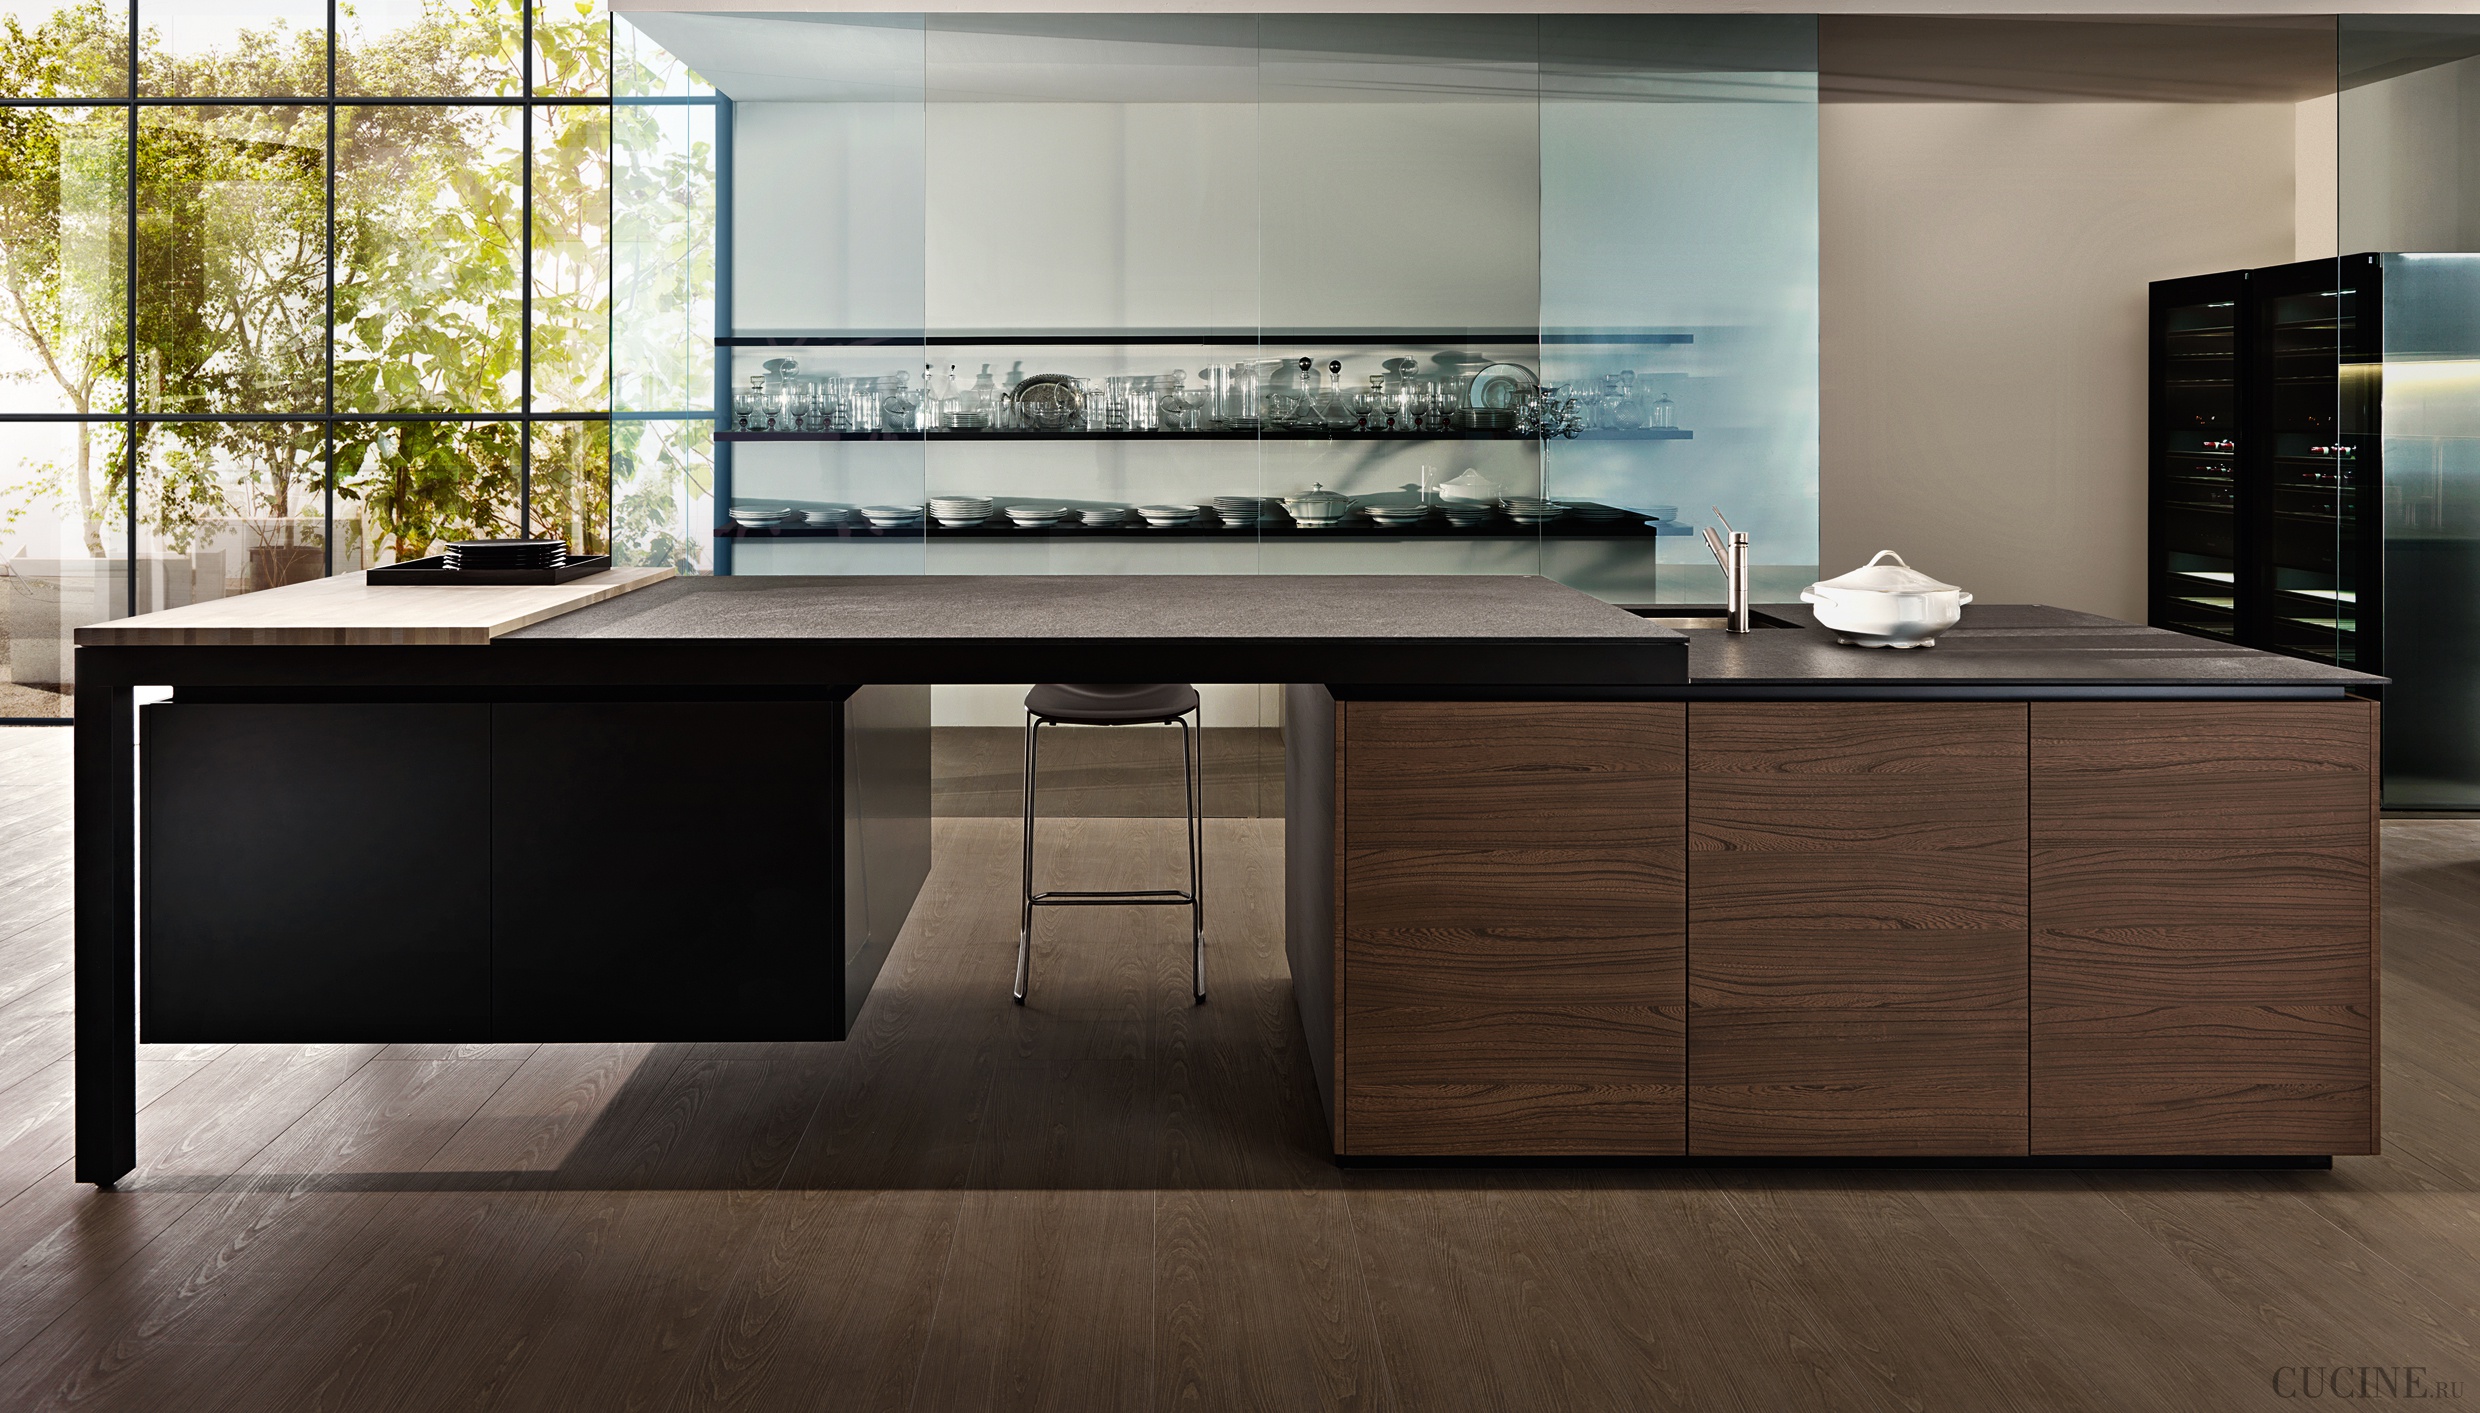 Read more about the article Eco-style kitchens – eco-friendly environment and natural materials